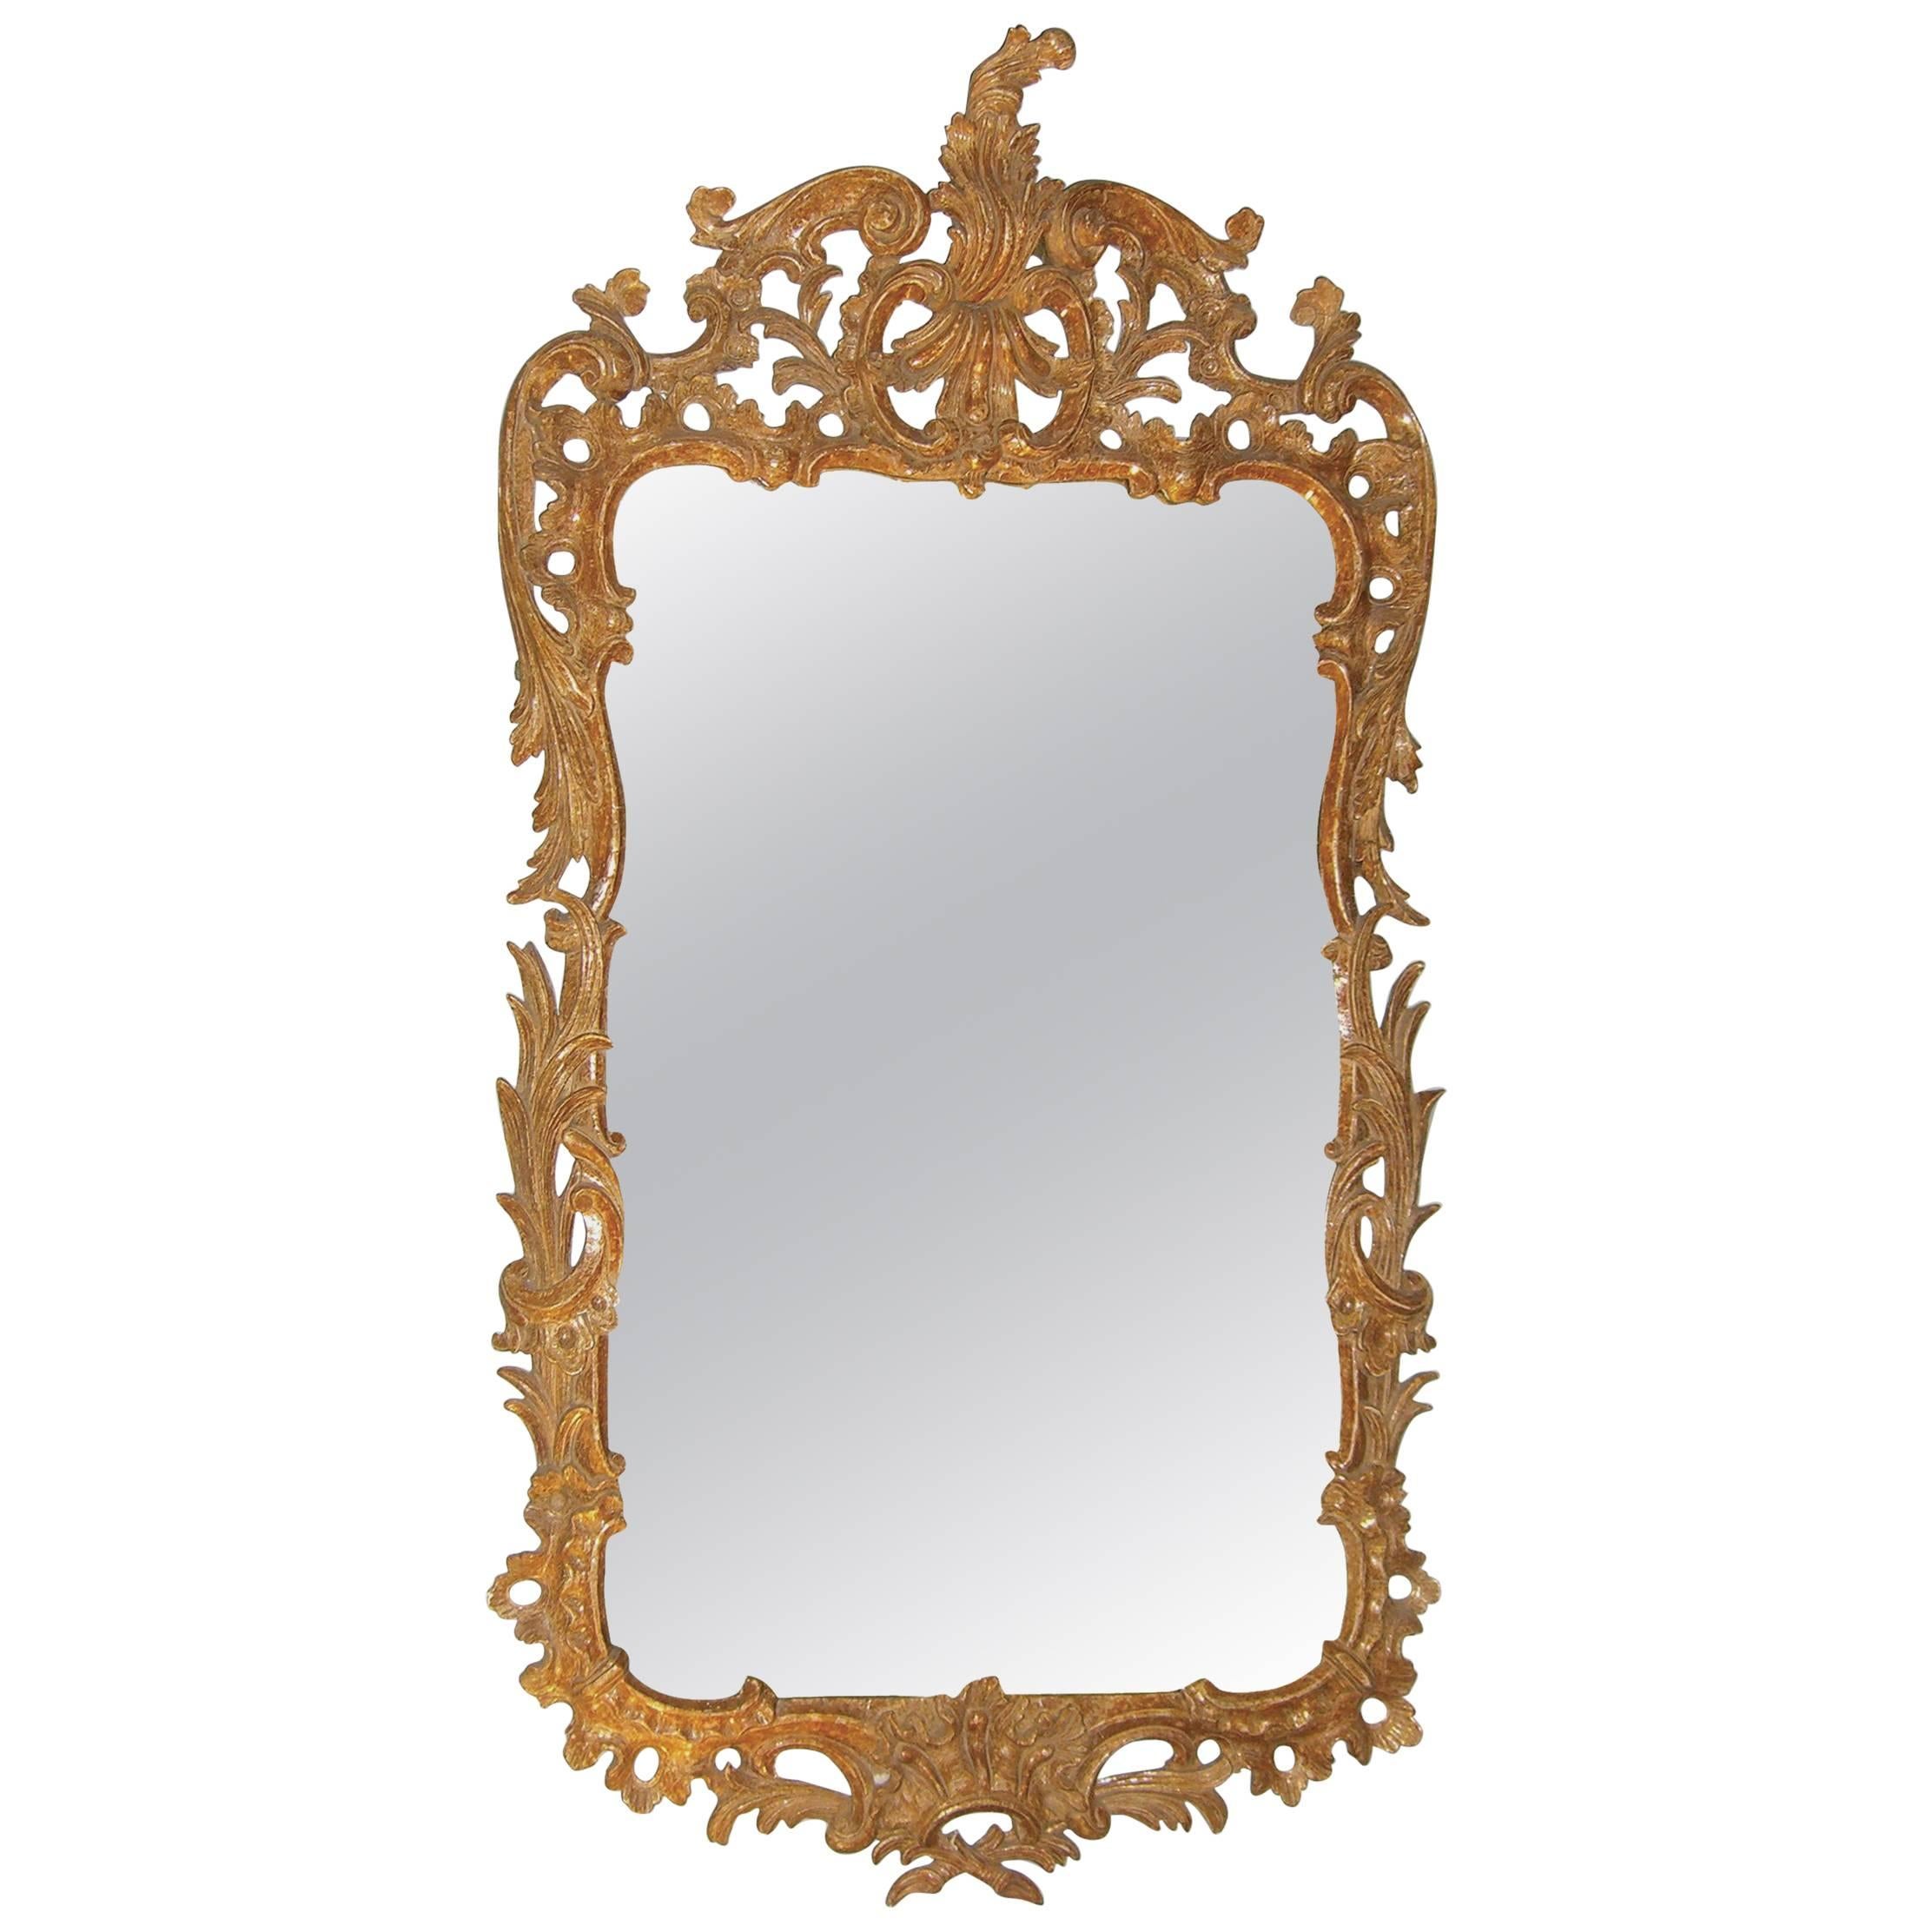 Mid-18th Century Chippendale Period Giltwood Mirror